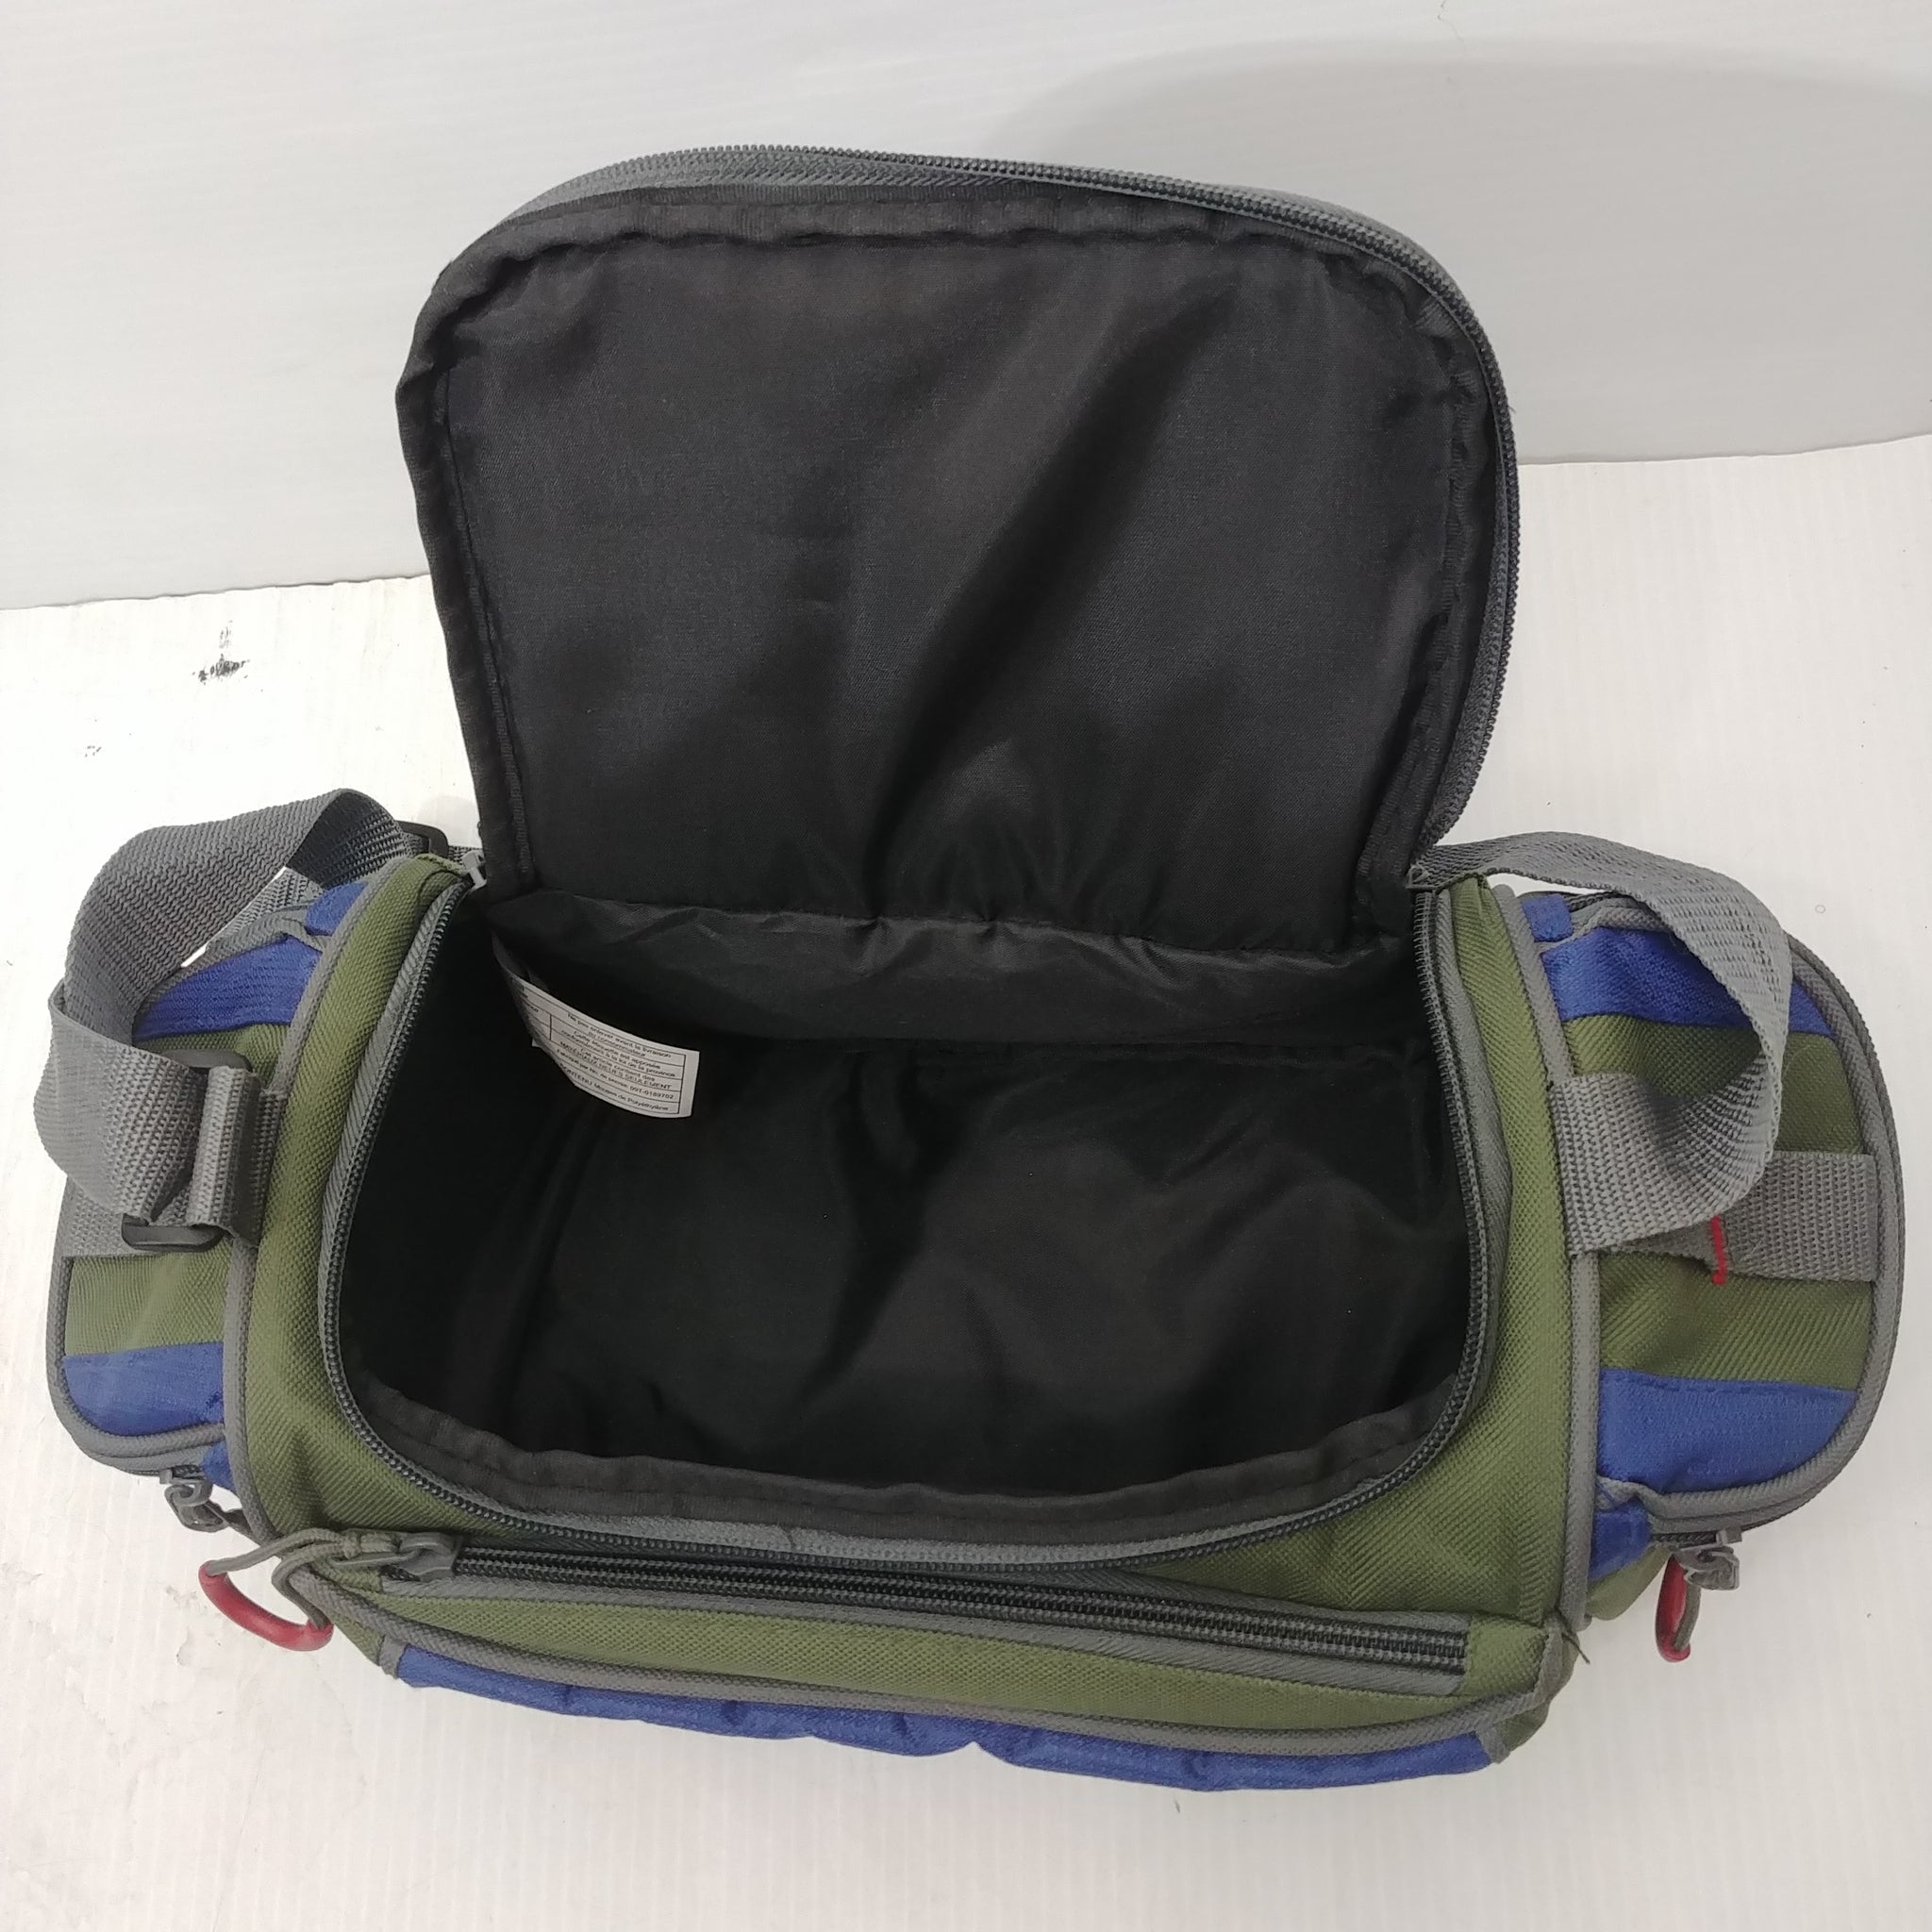 NEW Plano Tackle Bag with Tackle containers for Sale in Blairsville, GA -  OfferUp